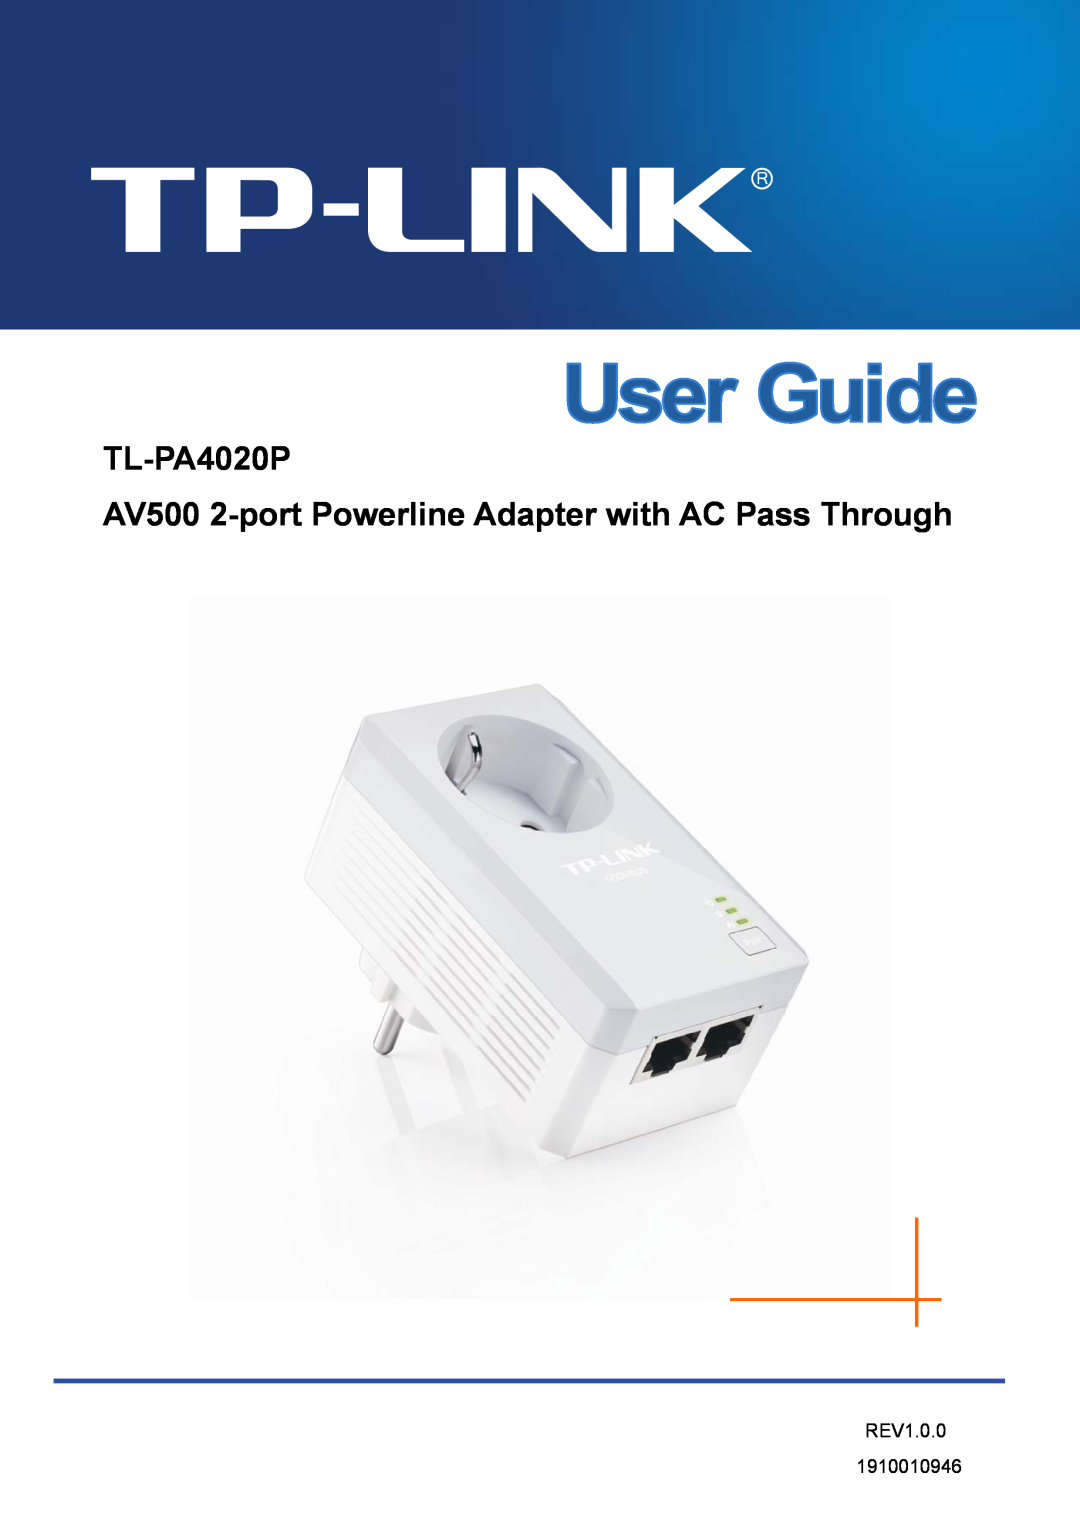 TP-Link manual TL-PA4020P AV500 2-port Powerline Adapter with AC Pass Through, REV1.0.0 1910010946 